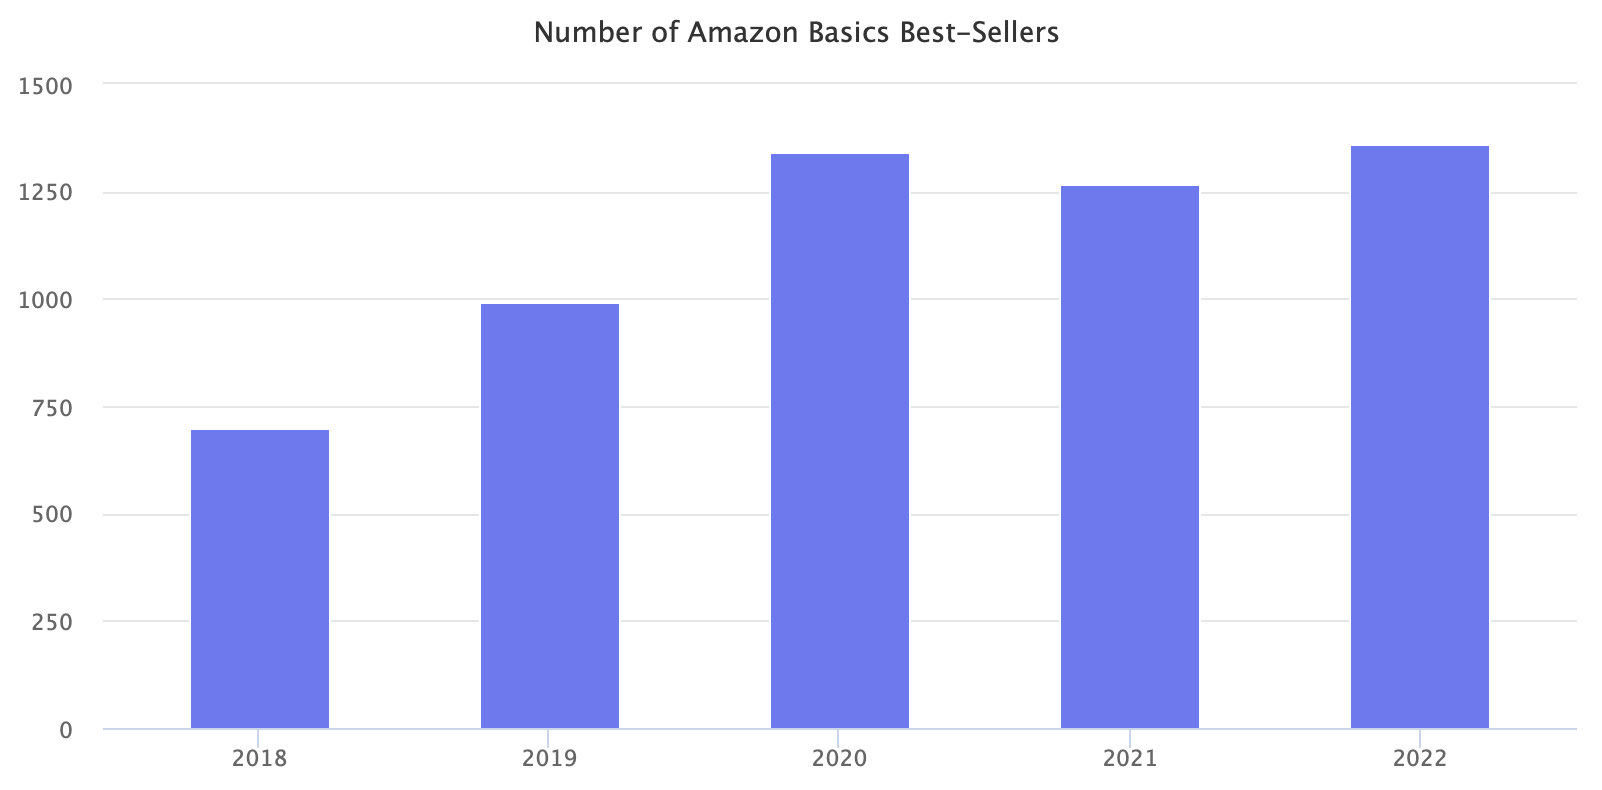 Number of Amazon Basics best-sellers